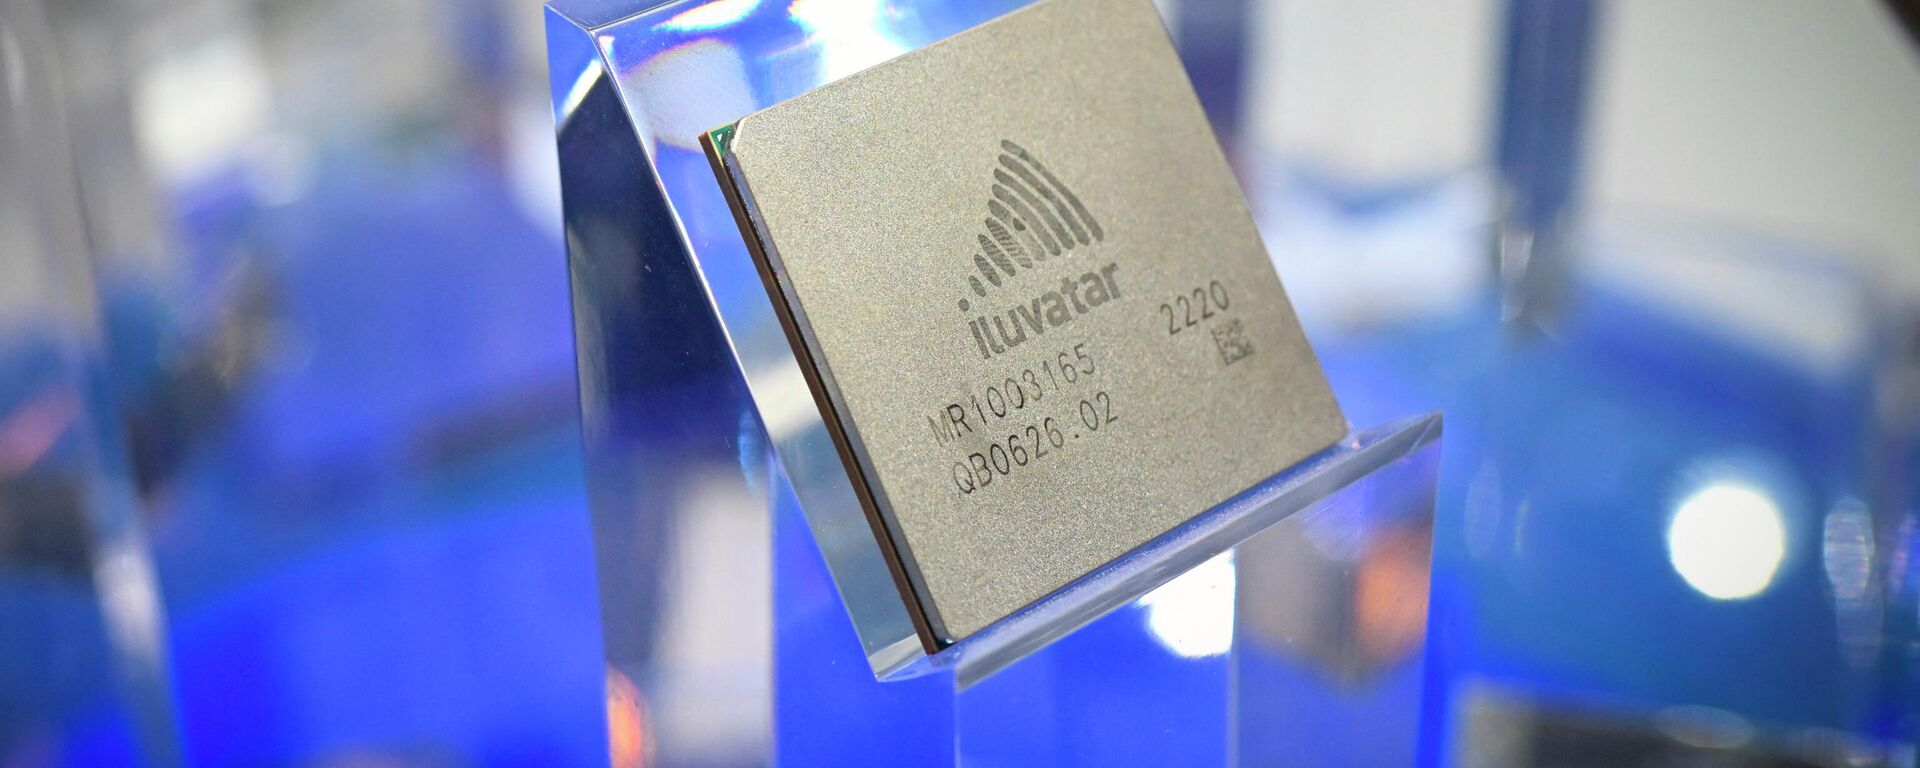 A chip of ILuvatar CoreX Semiconductor is seen during the World Artificial Intelligence Conference (WAIC) in Shanghai on July 6, 2023 - Sputnik International, 1920, 22.07.2023